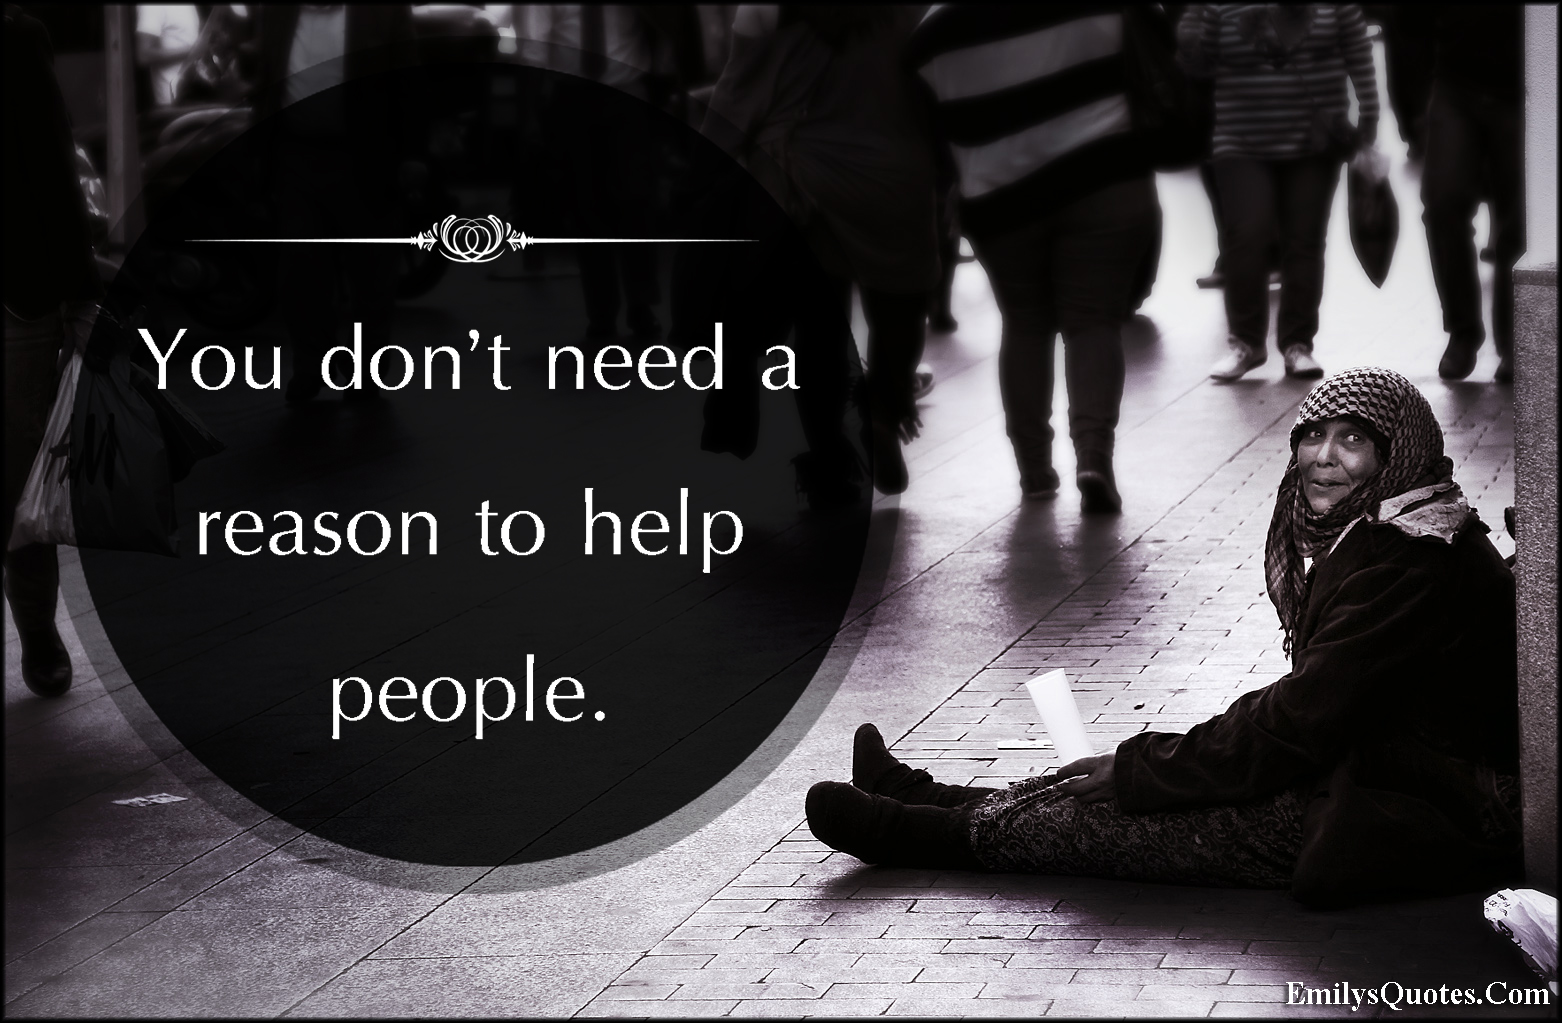 You don’t need a reason to help people | Popular inspirational quotes ...